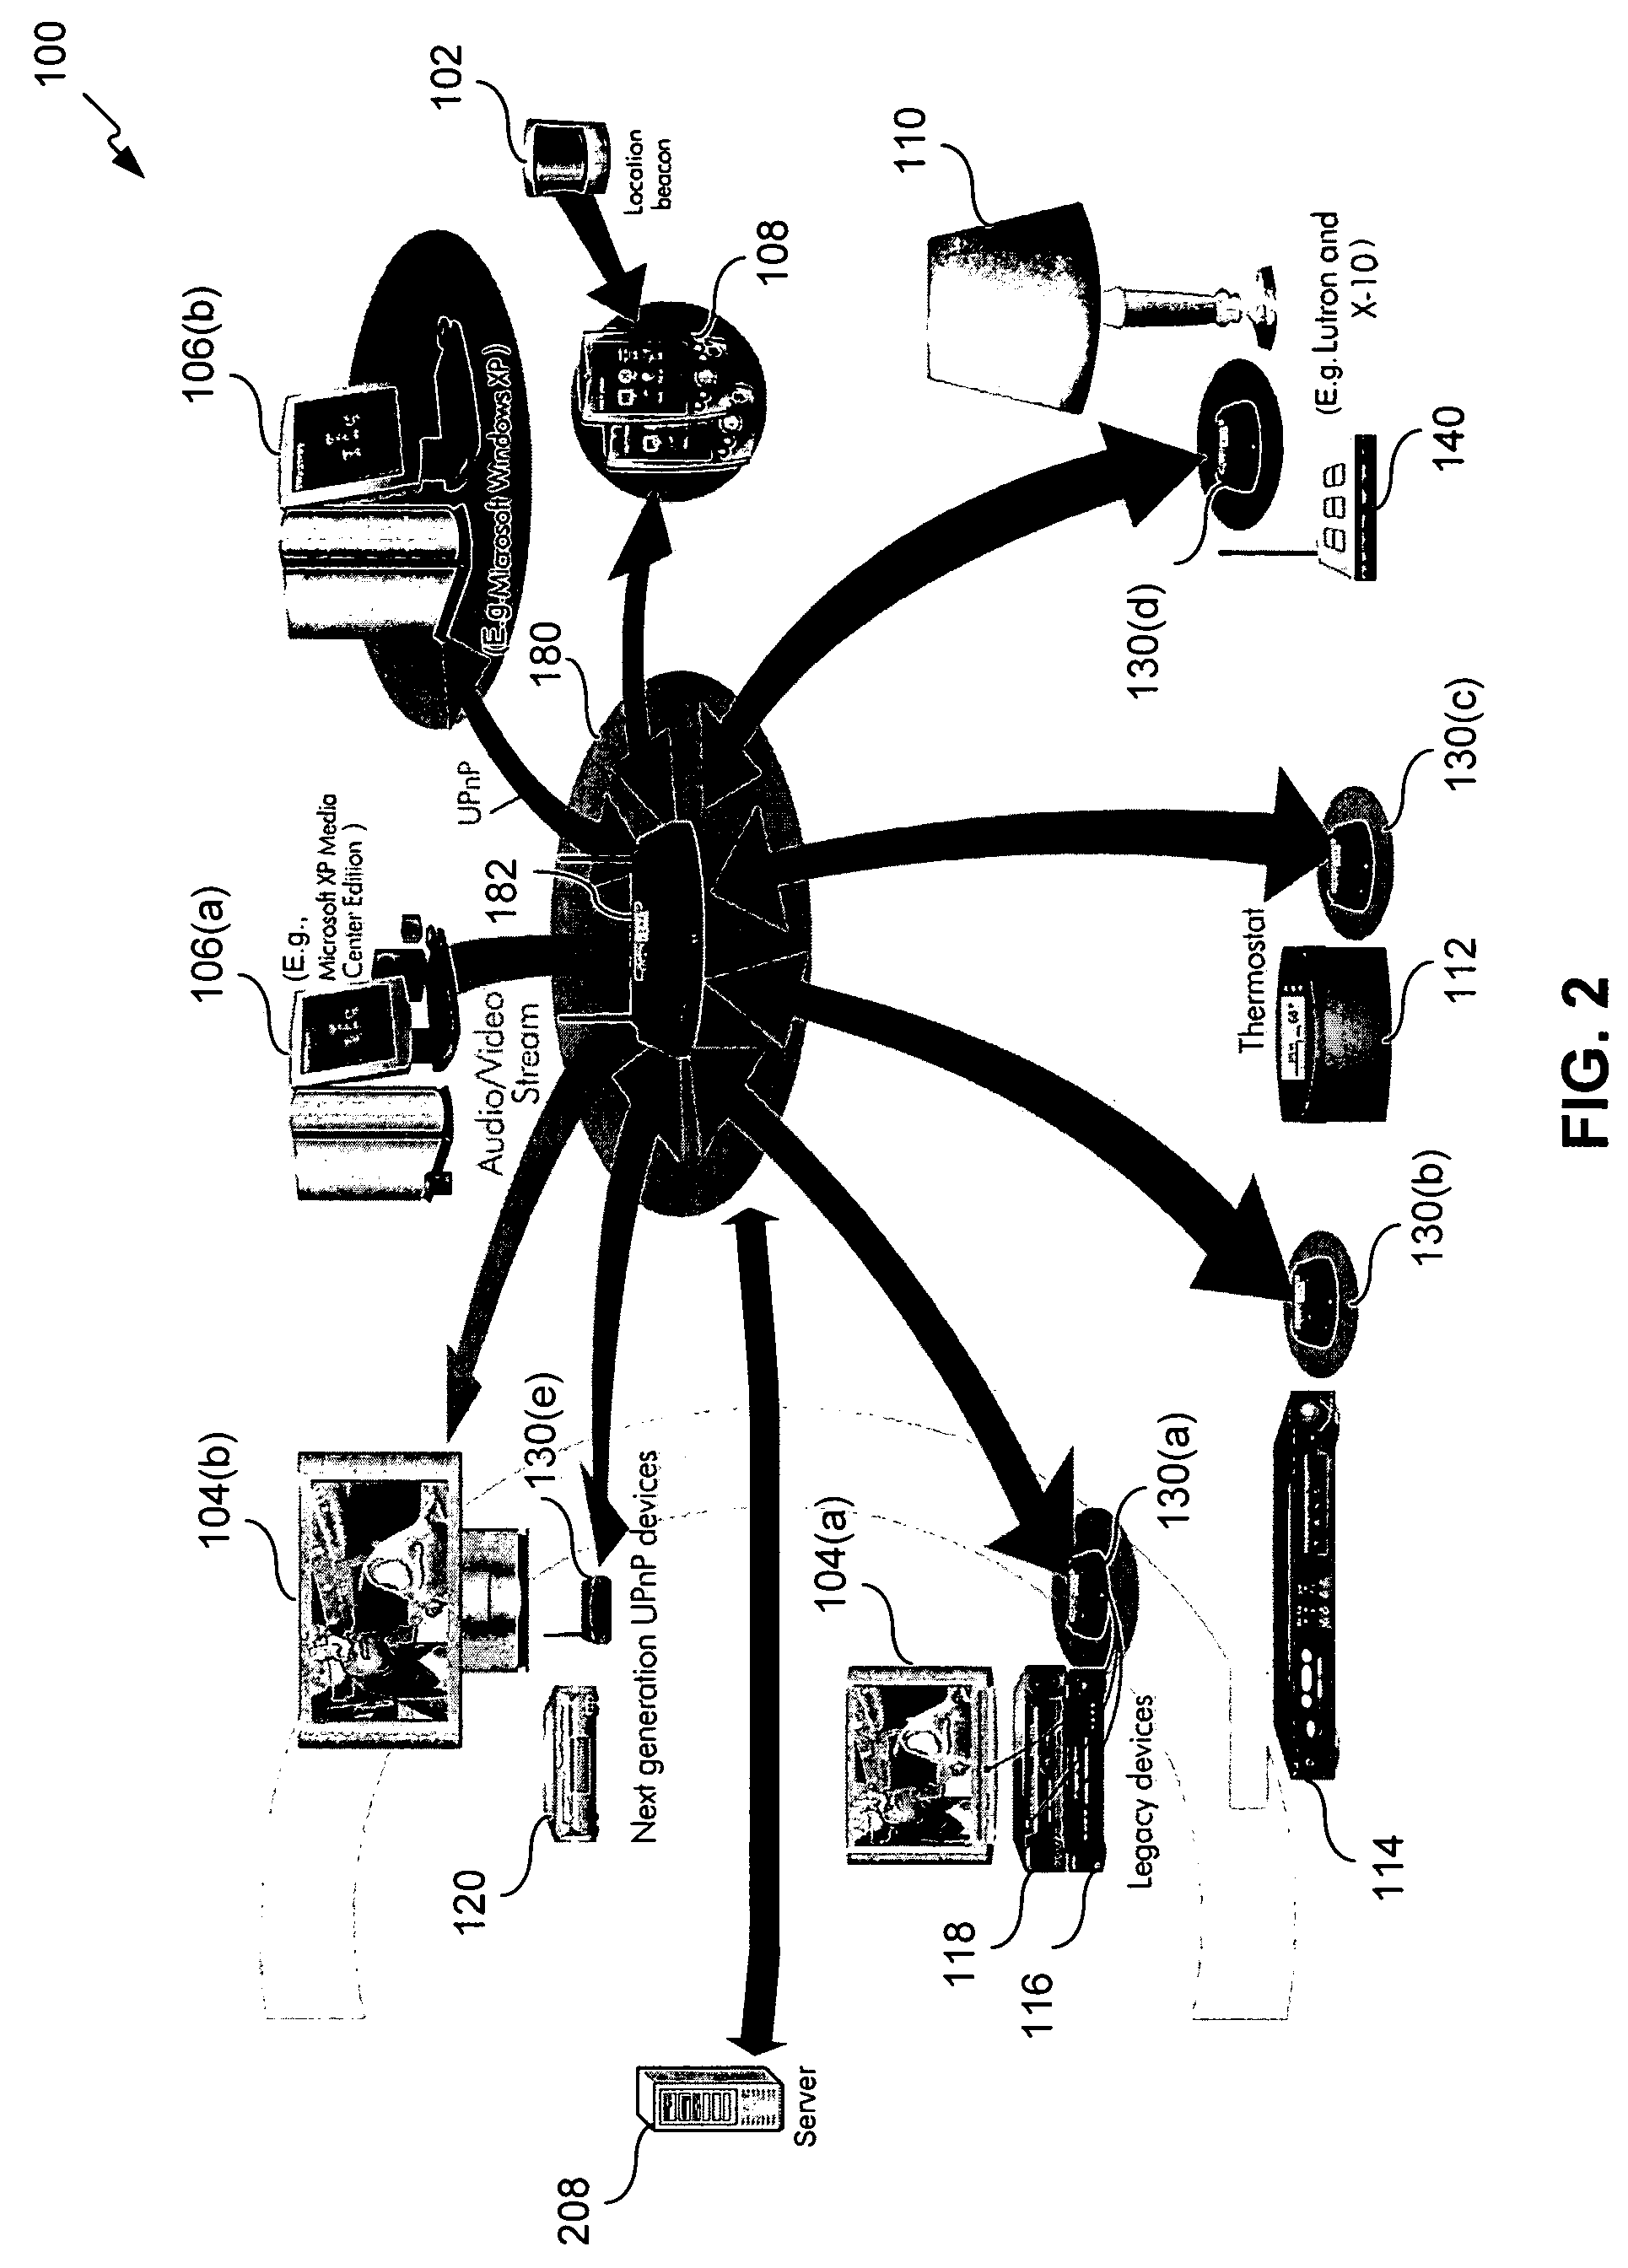 Method of controlling a device to perform an activity-based or an experience-based operation